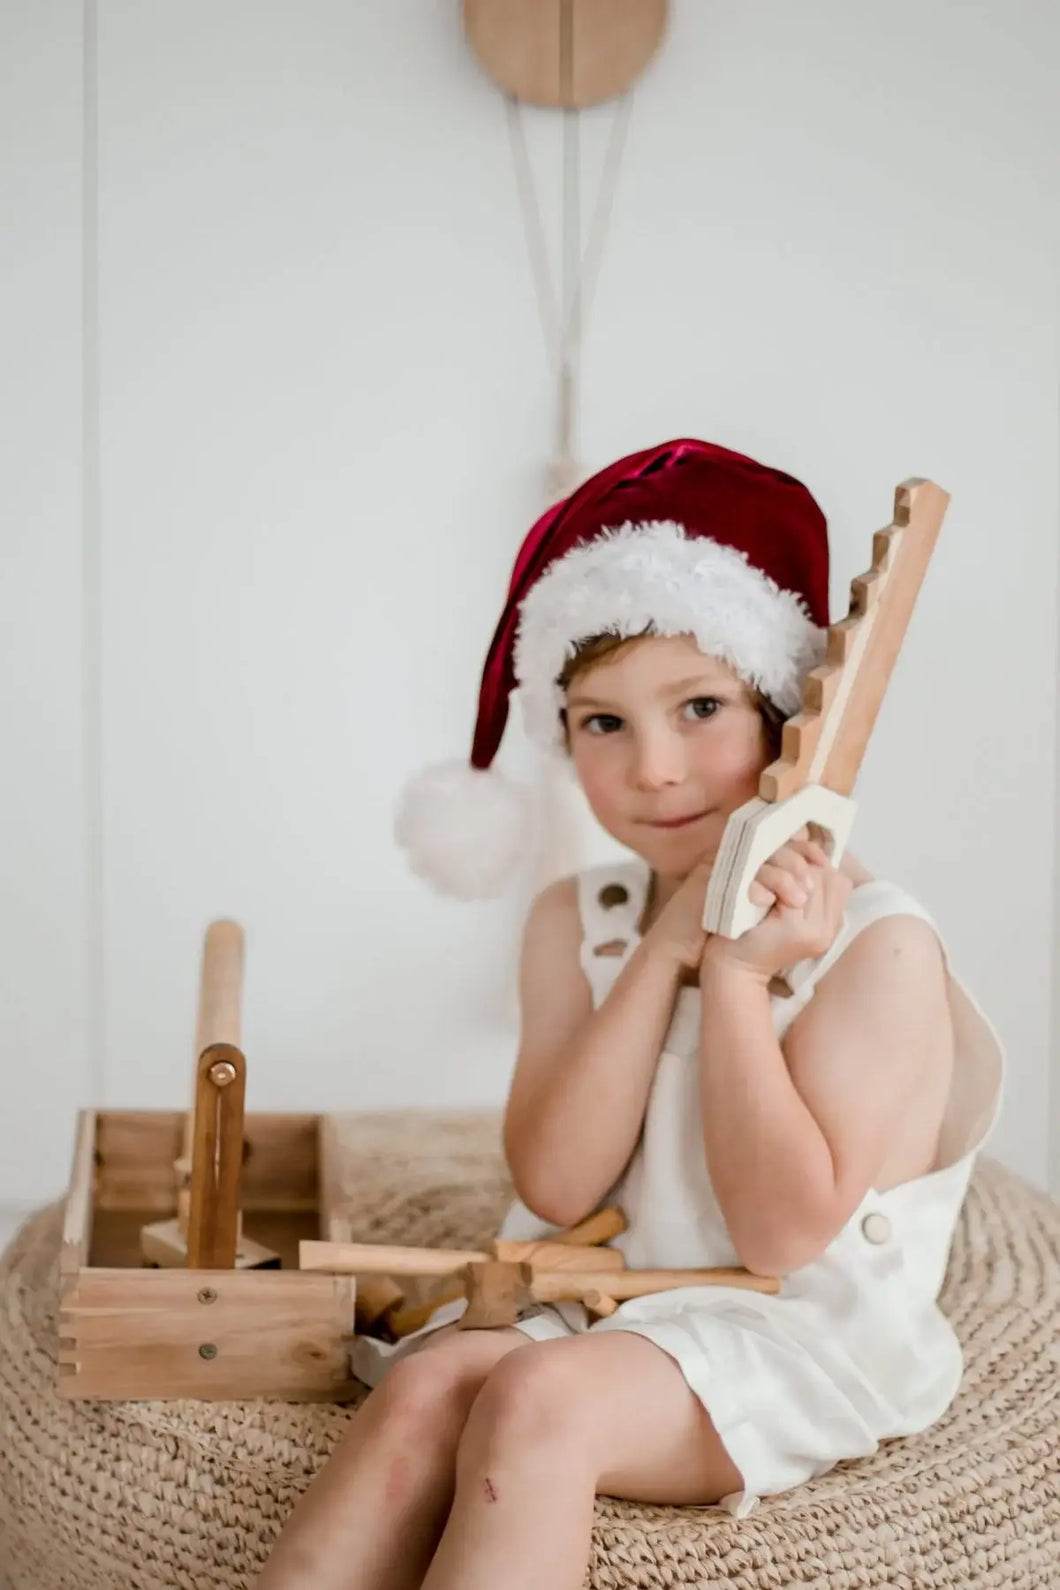 child wearing a Santa hat playing with wooden tool set